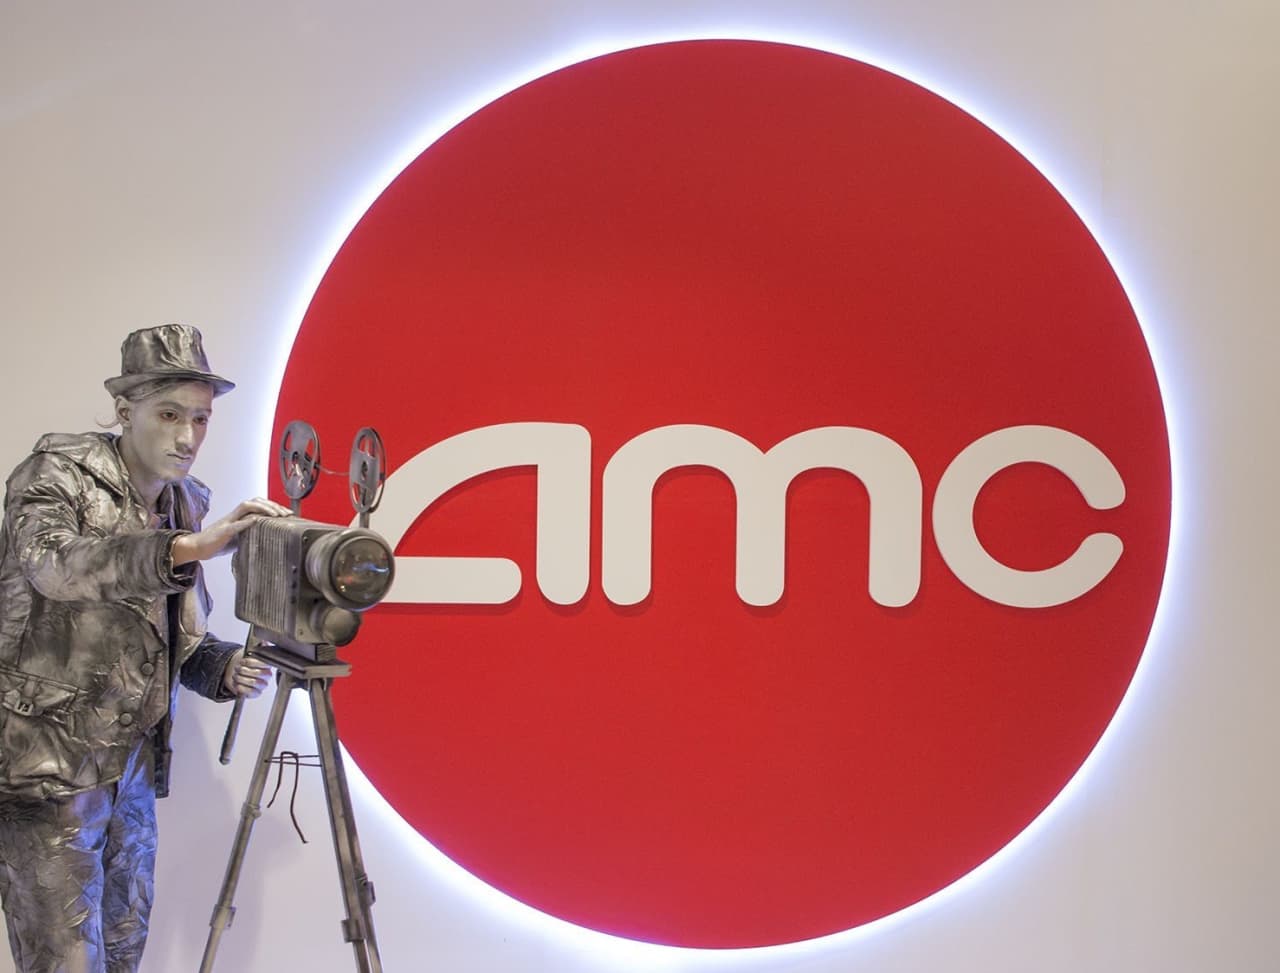 AMC completed sale $250 million of stock Monday after meme-stock rally